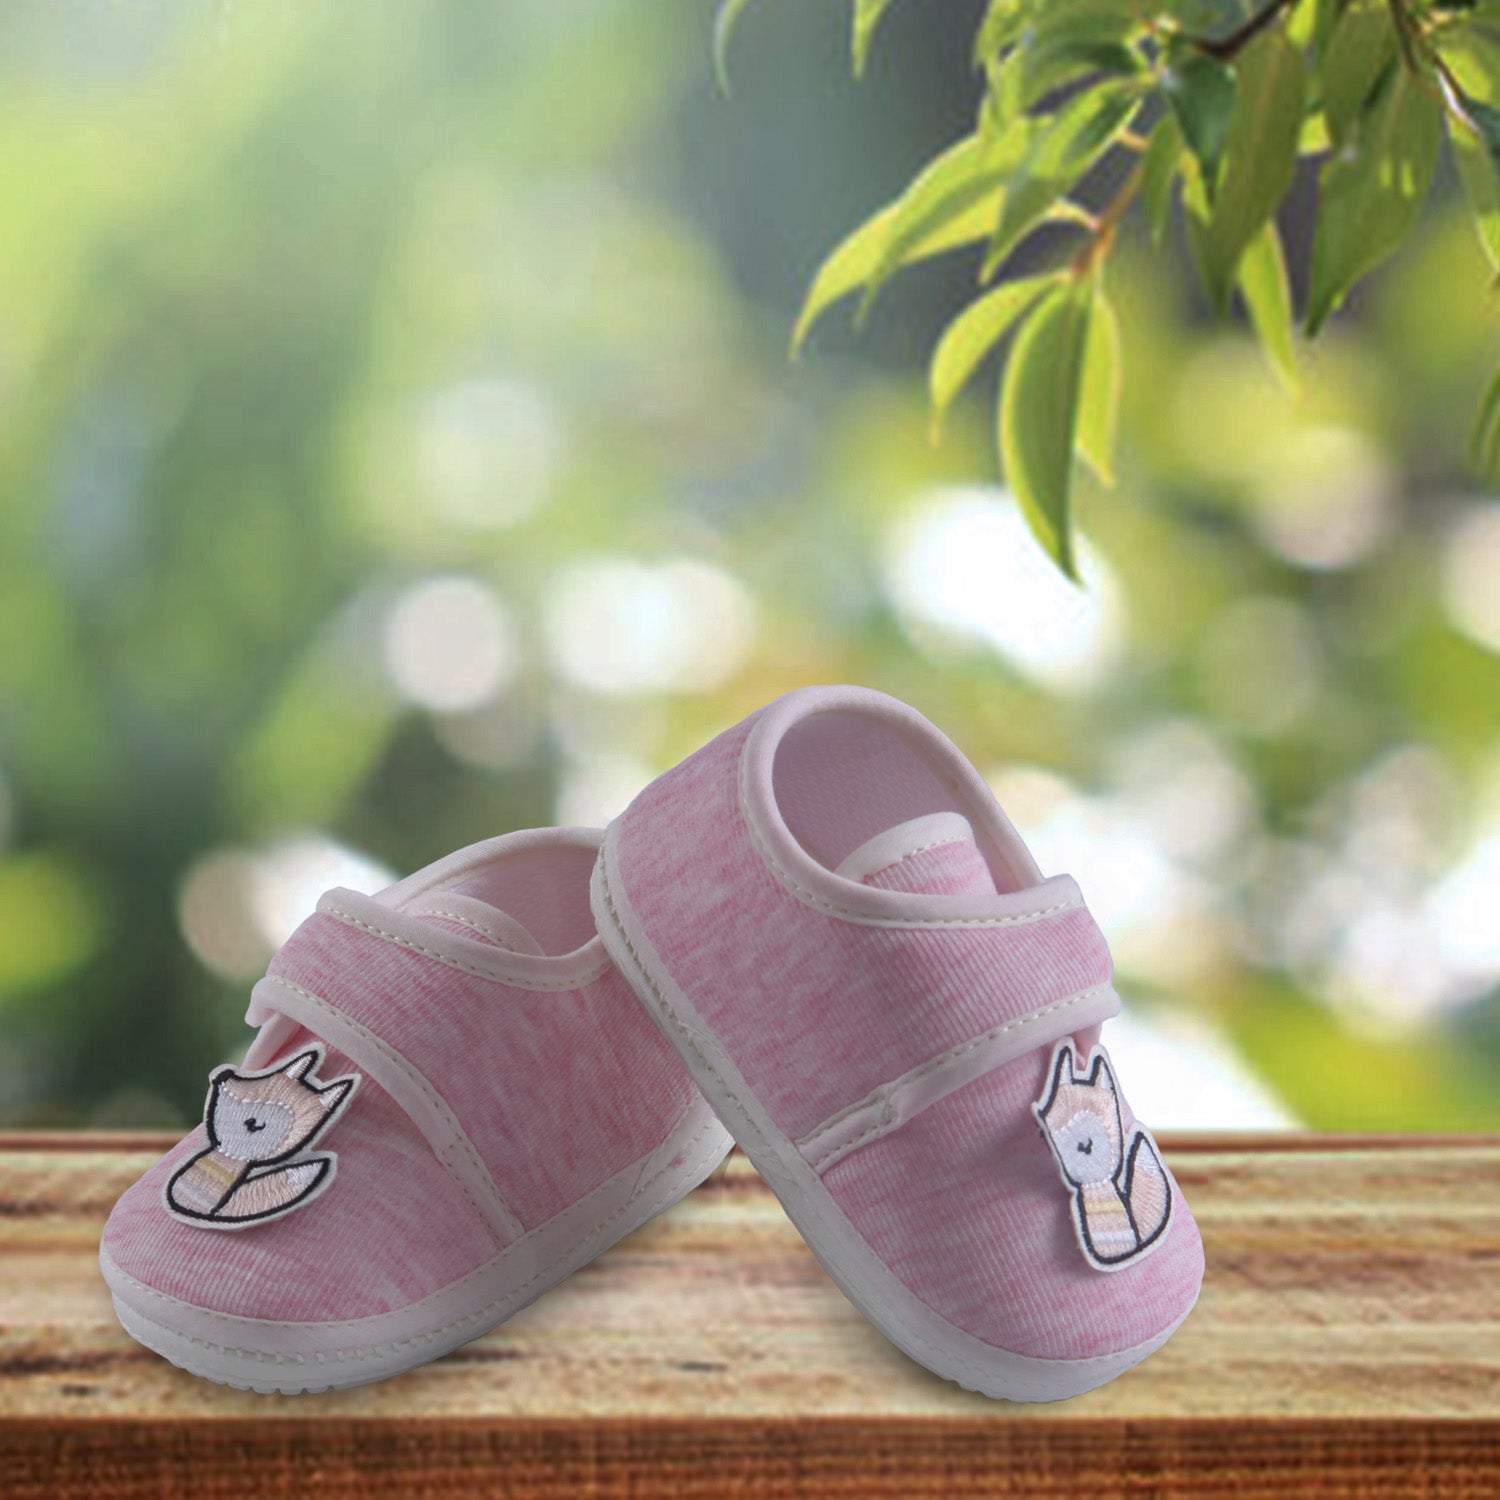 Non-slip Booties with Strap Kids Shoes Fox - Pink